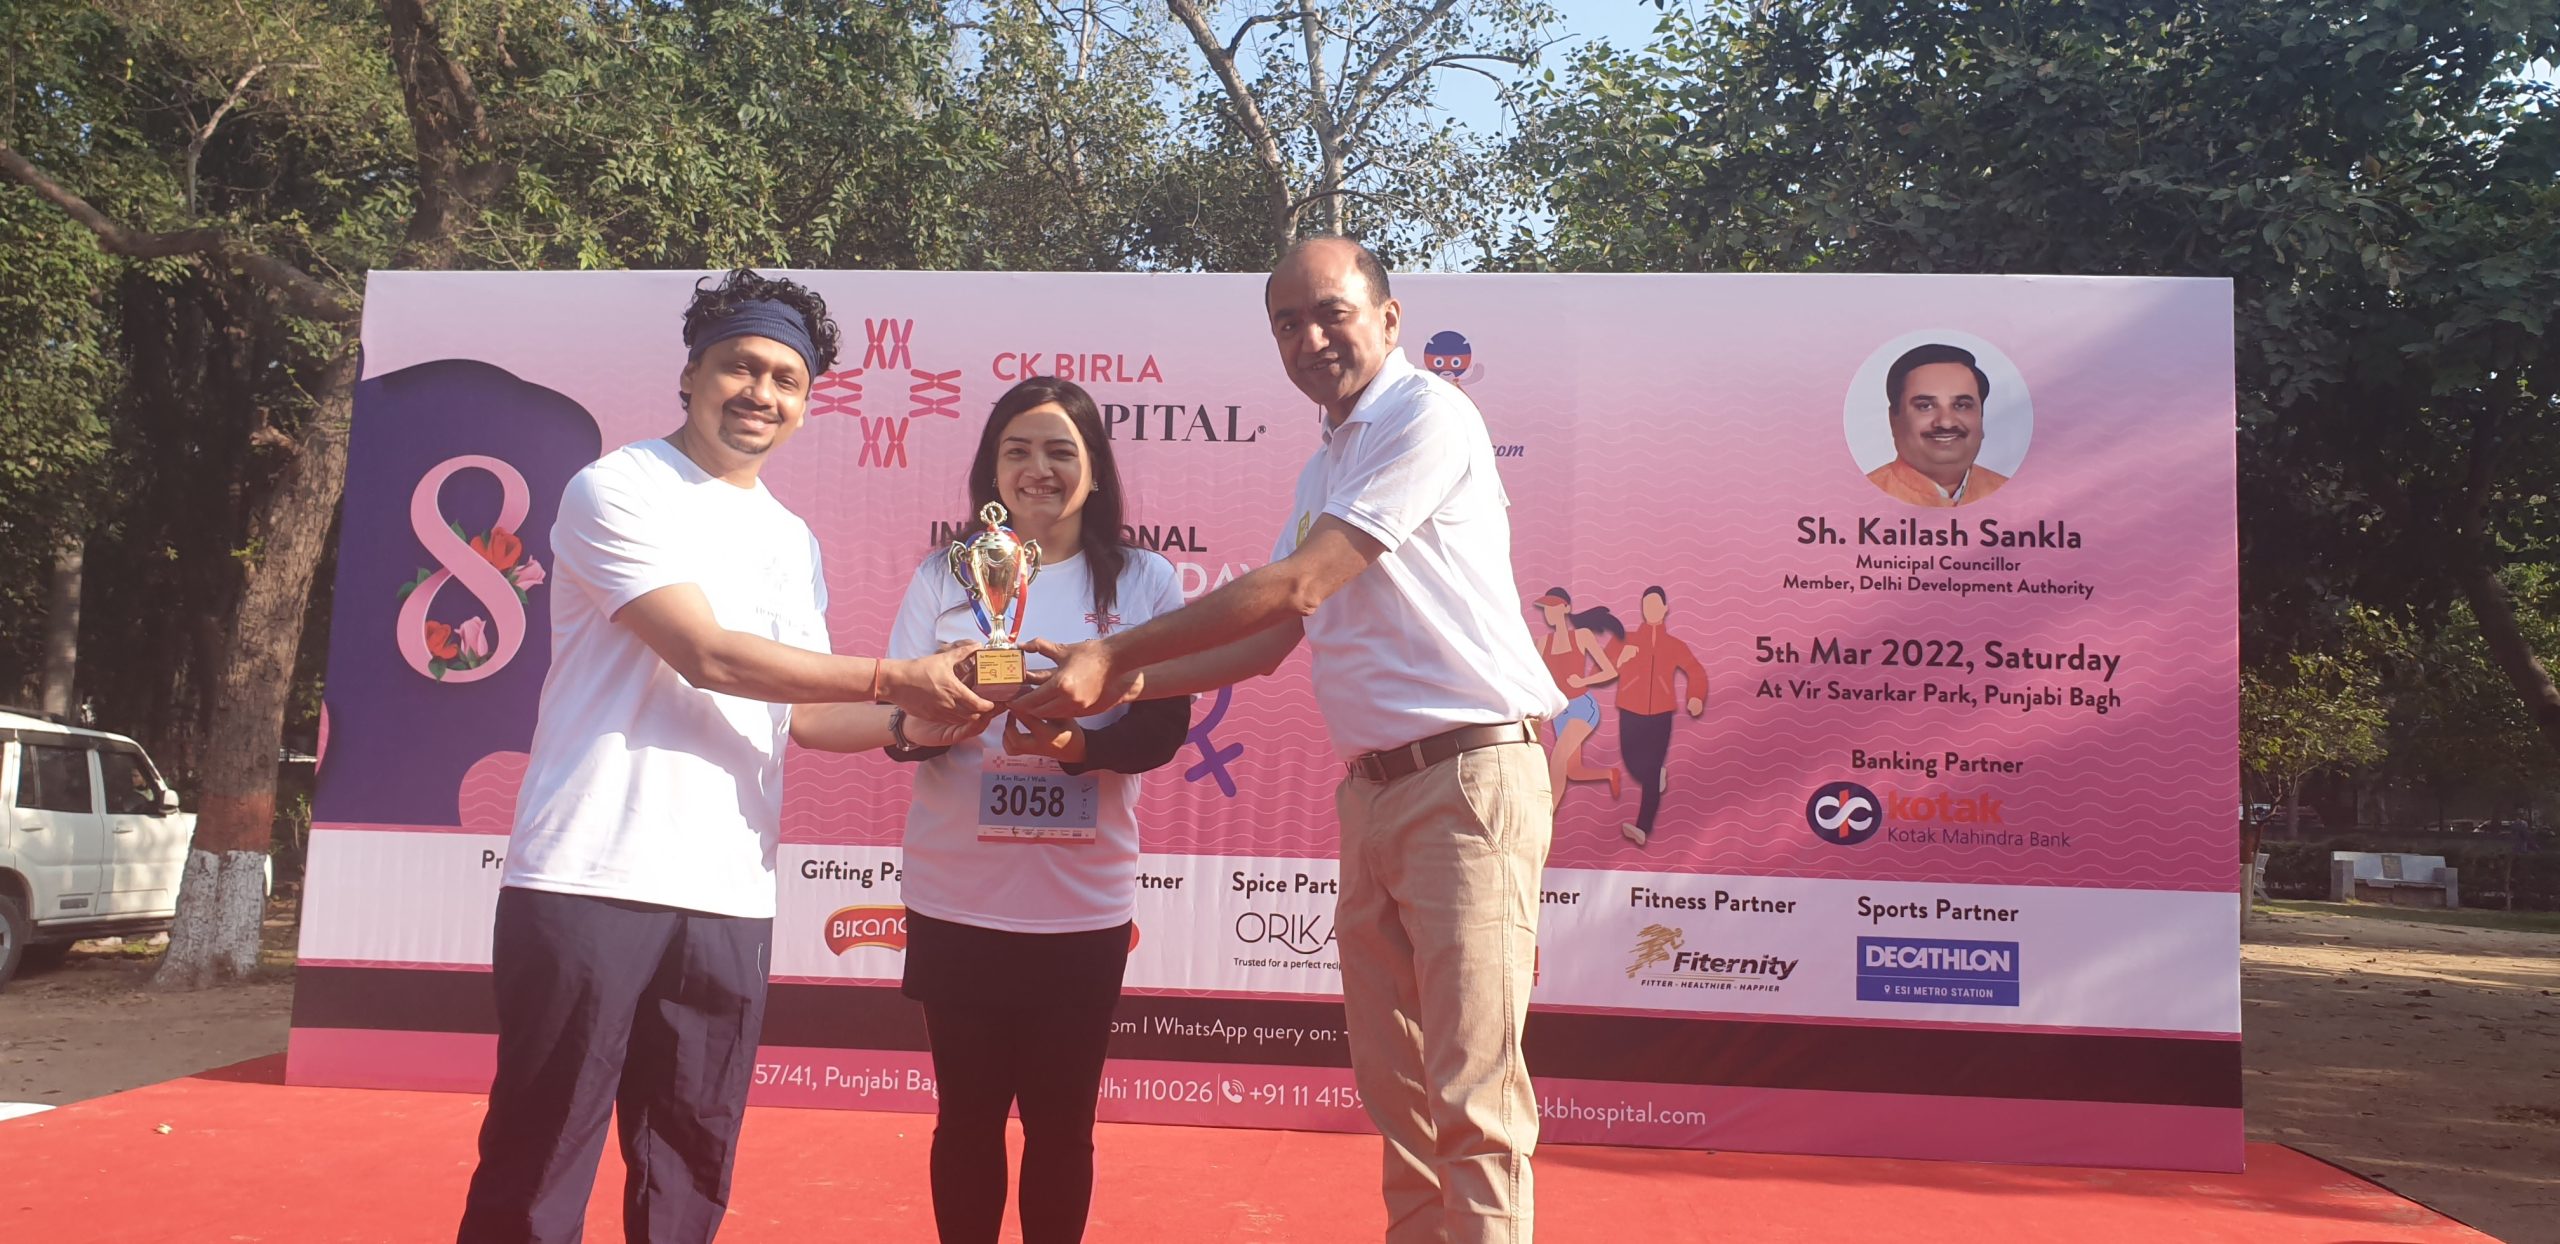 CK Birla Hospital® organizes a walkathon for International Women’s Day to #BreakTheBias and forge equality for women’s health